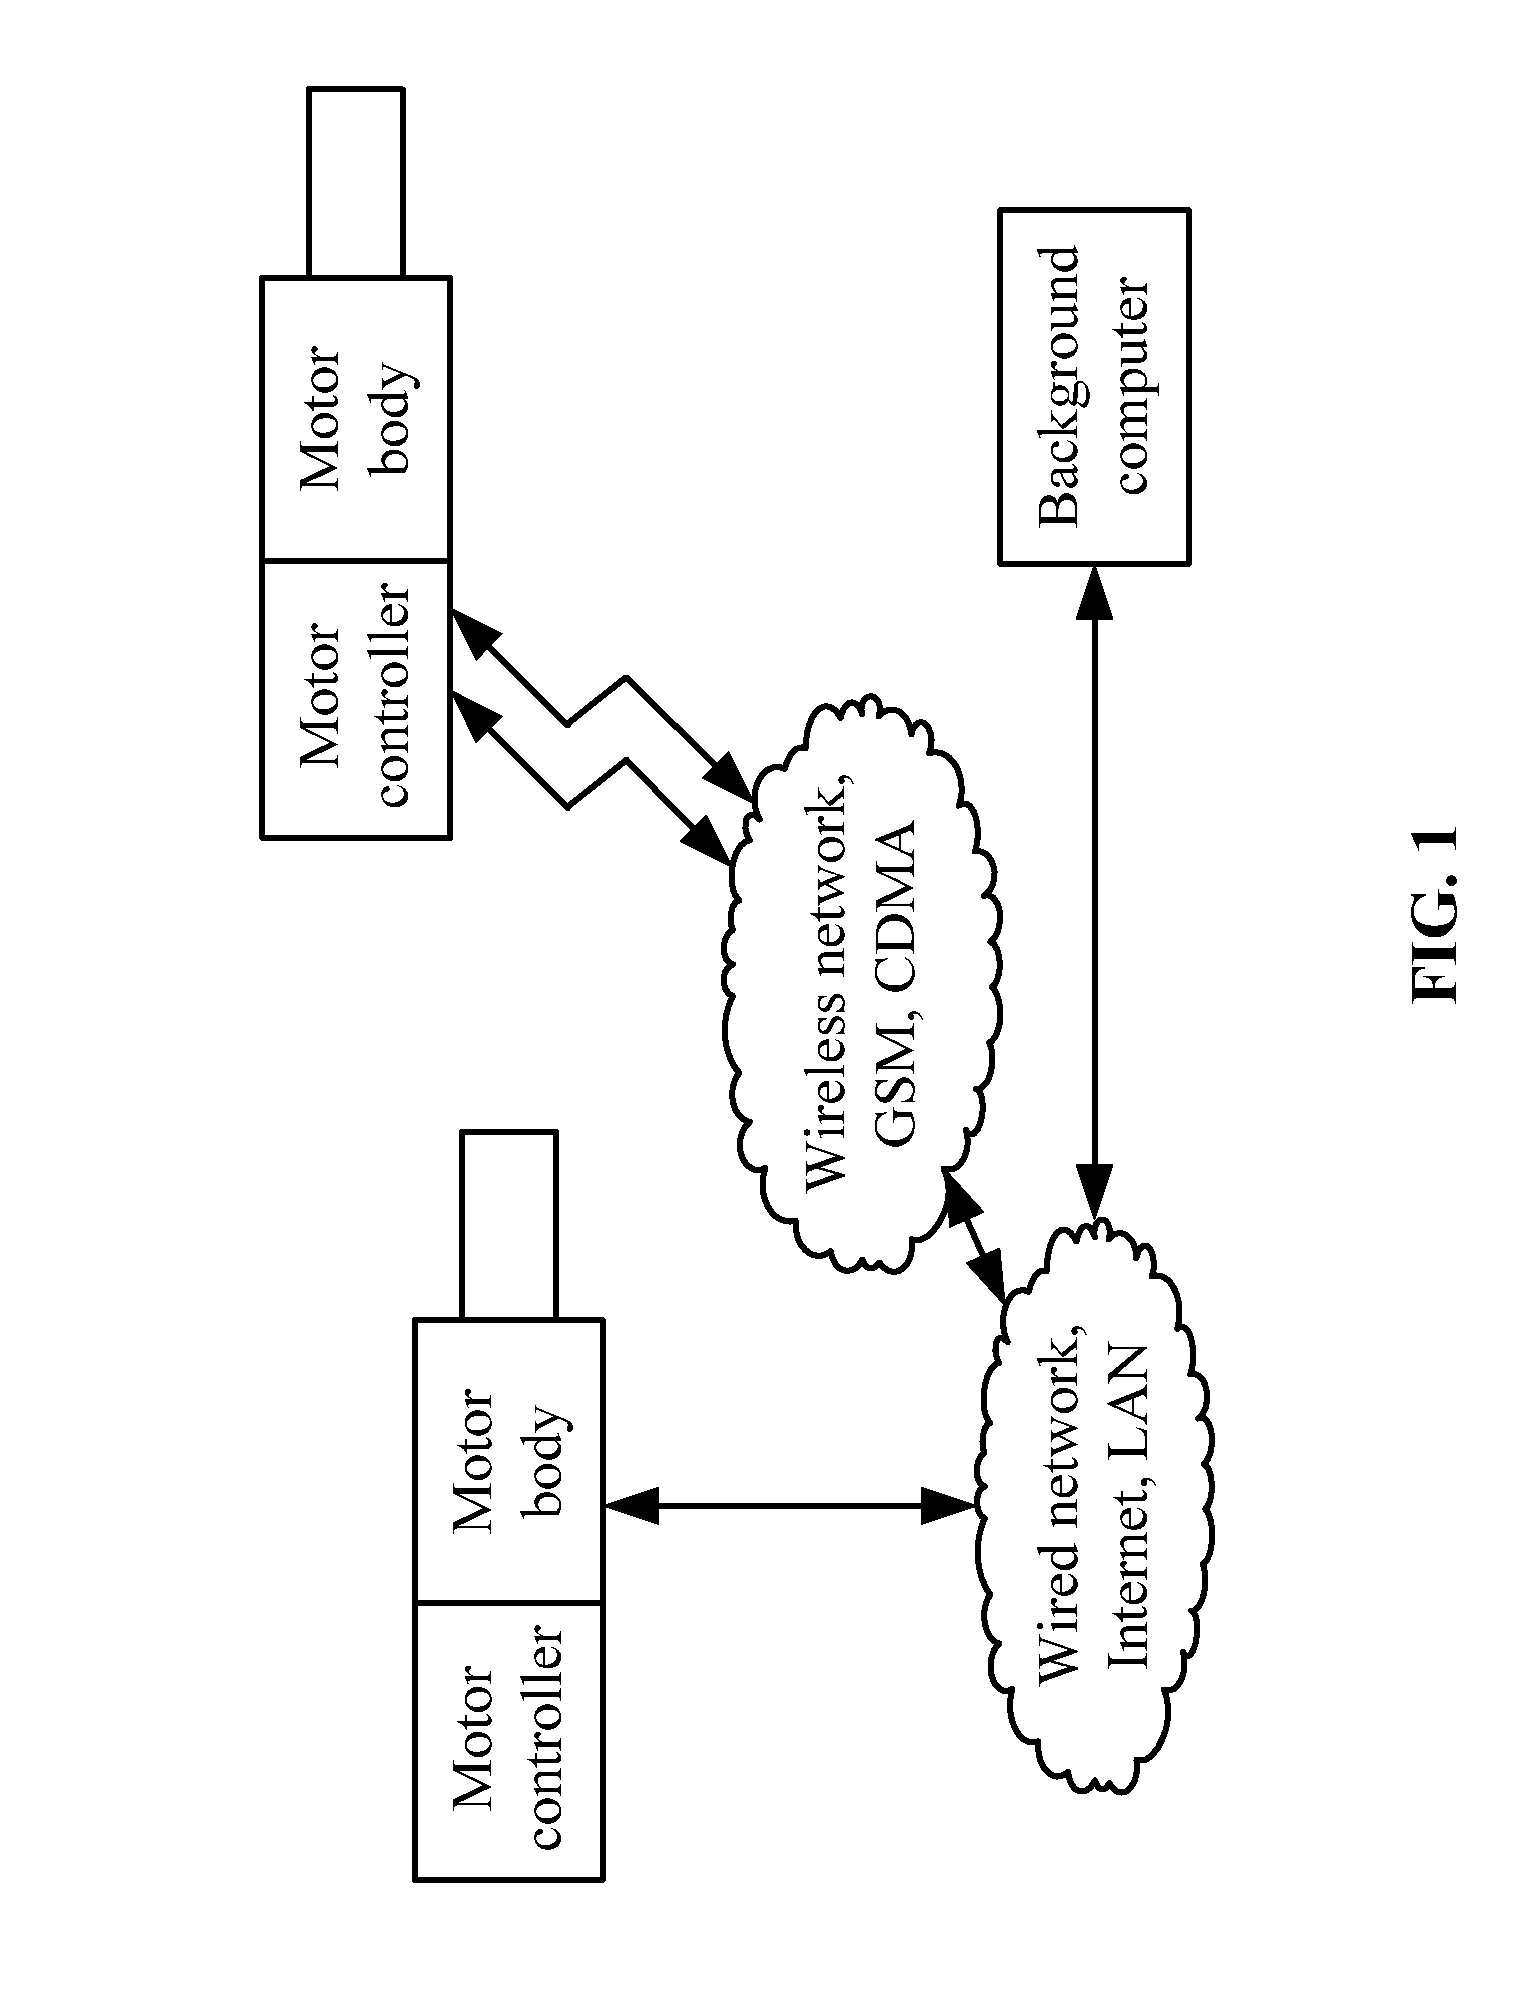 Networked motor, remote data acquisition therefor, and fault diagnosis system therefor